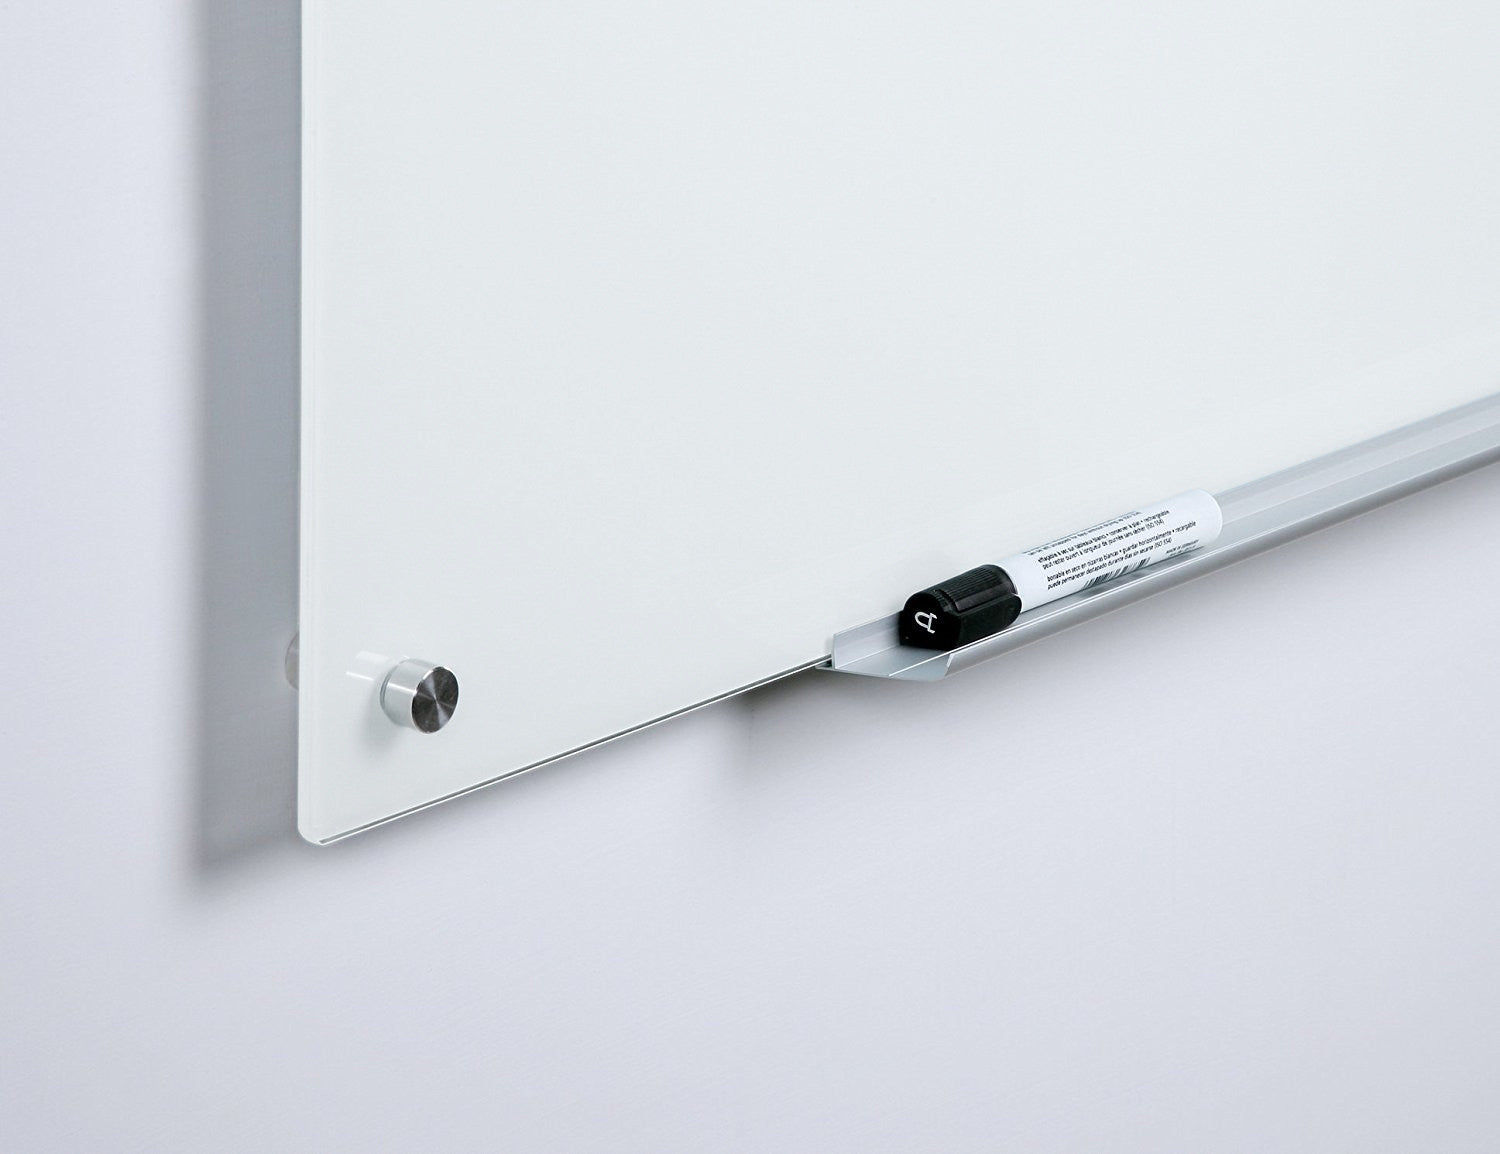 Magnetic Ultra White Glass Dry-Erase Board Set - Includes Board,  Neodymium Magnets, and Marker Tray. Wall Mounted in  Office setting. 